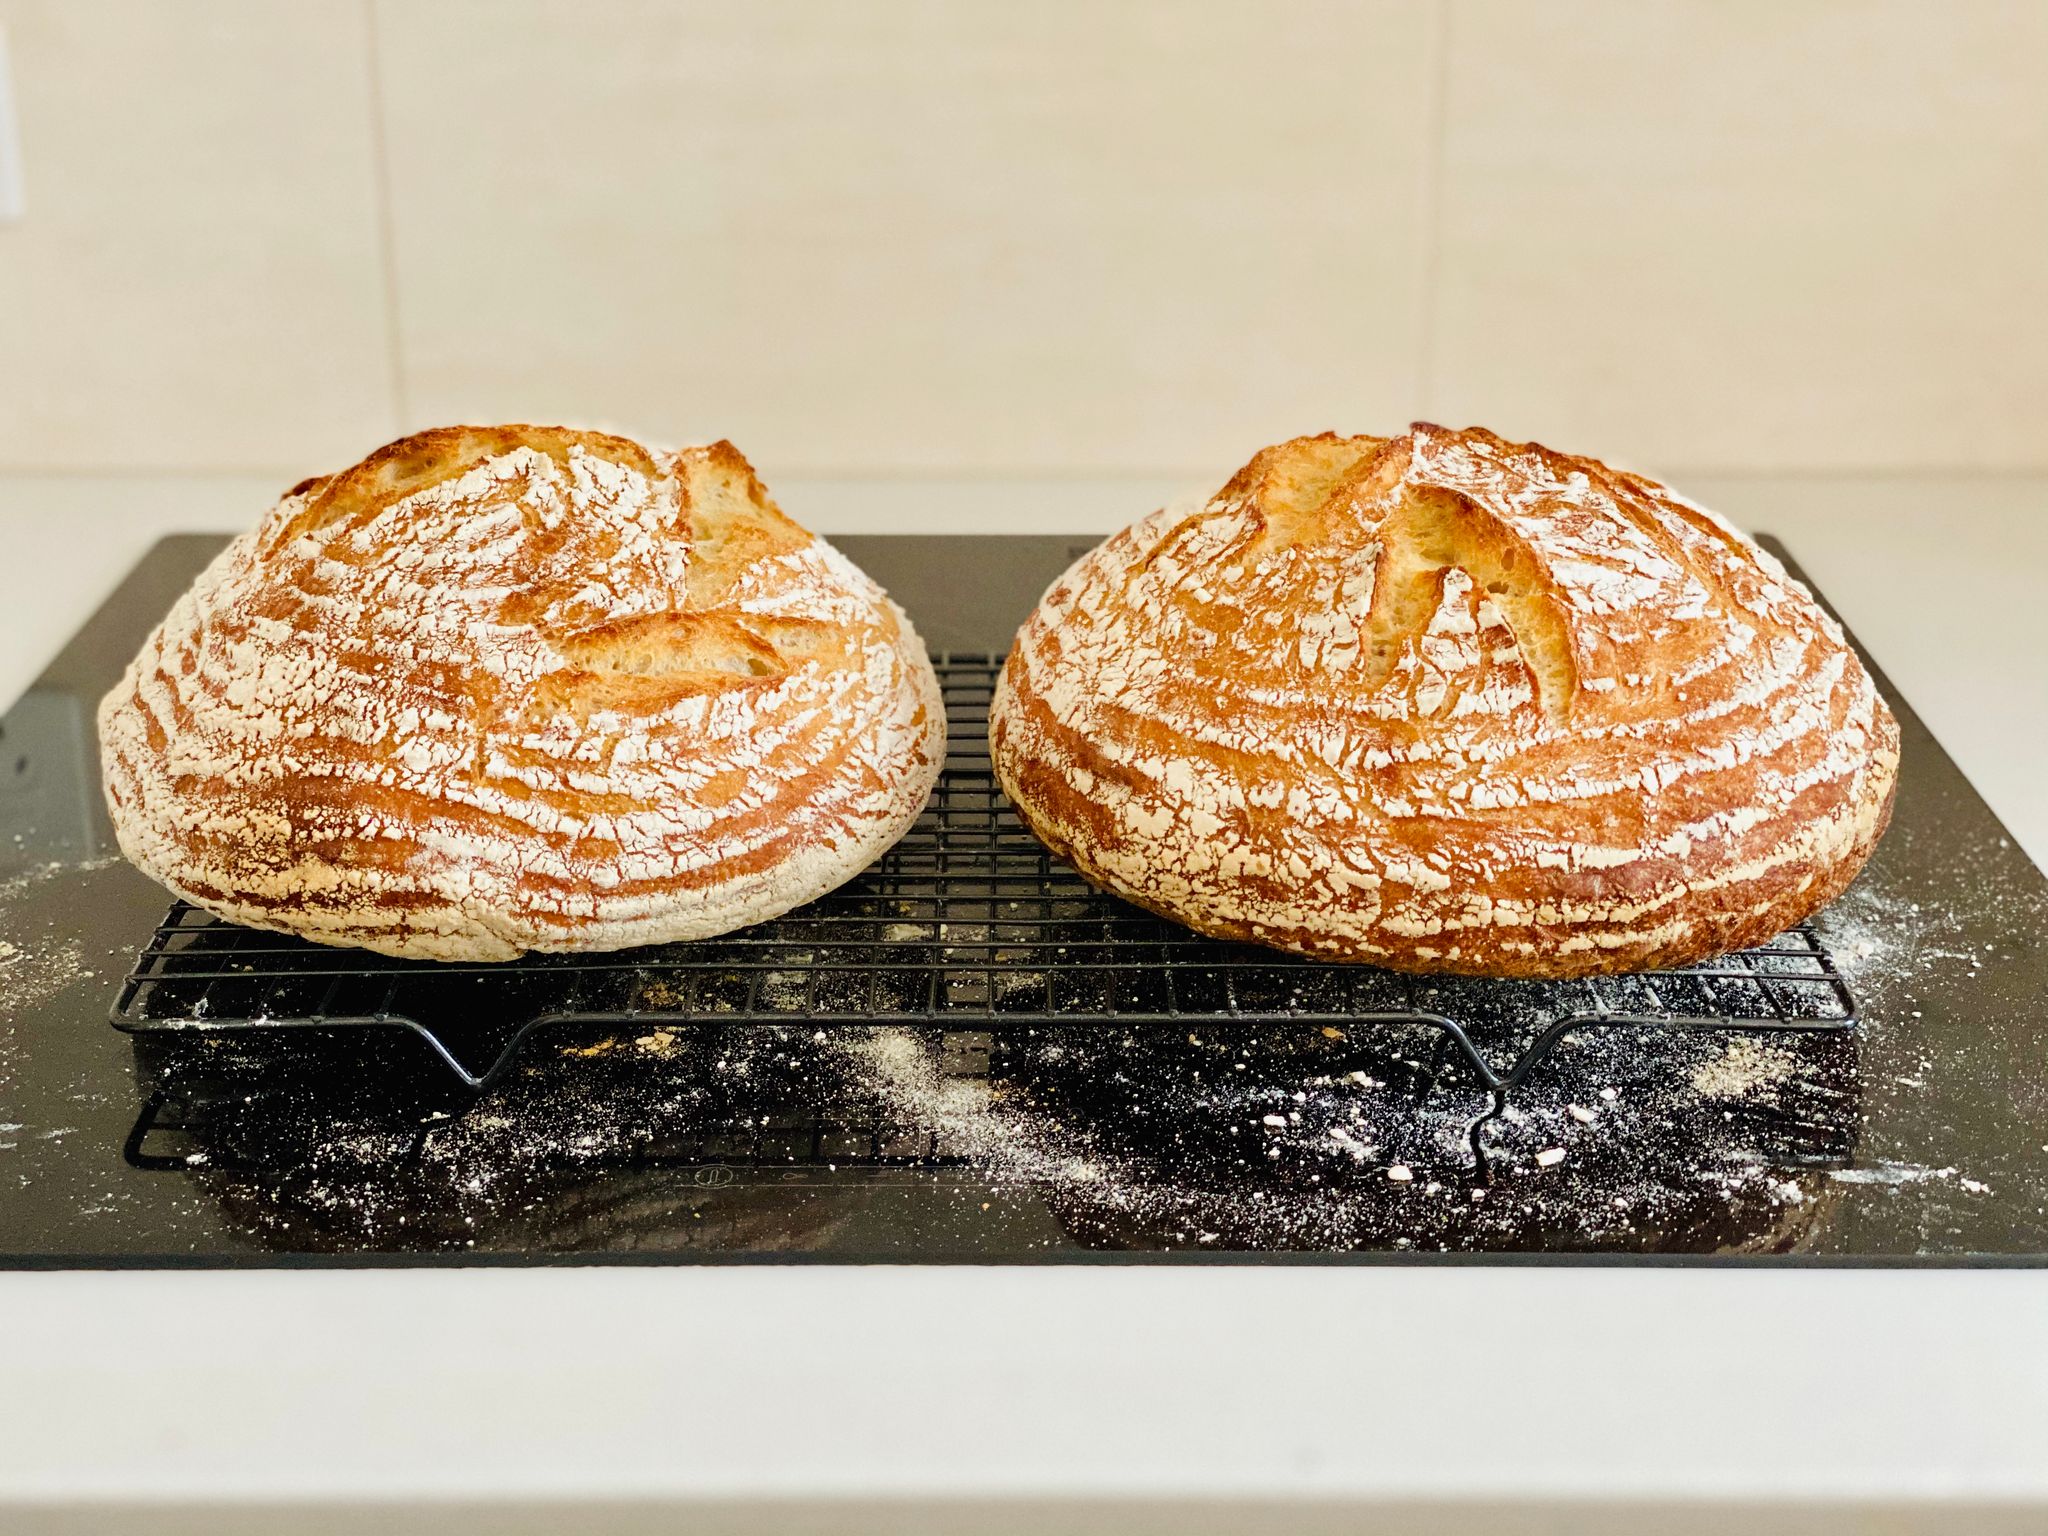 A photo of two round golden-brown loaves of bread sitting on a cooling rack.